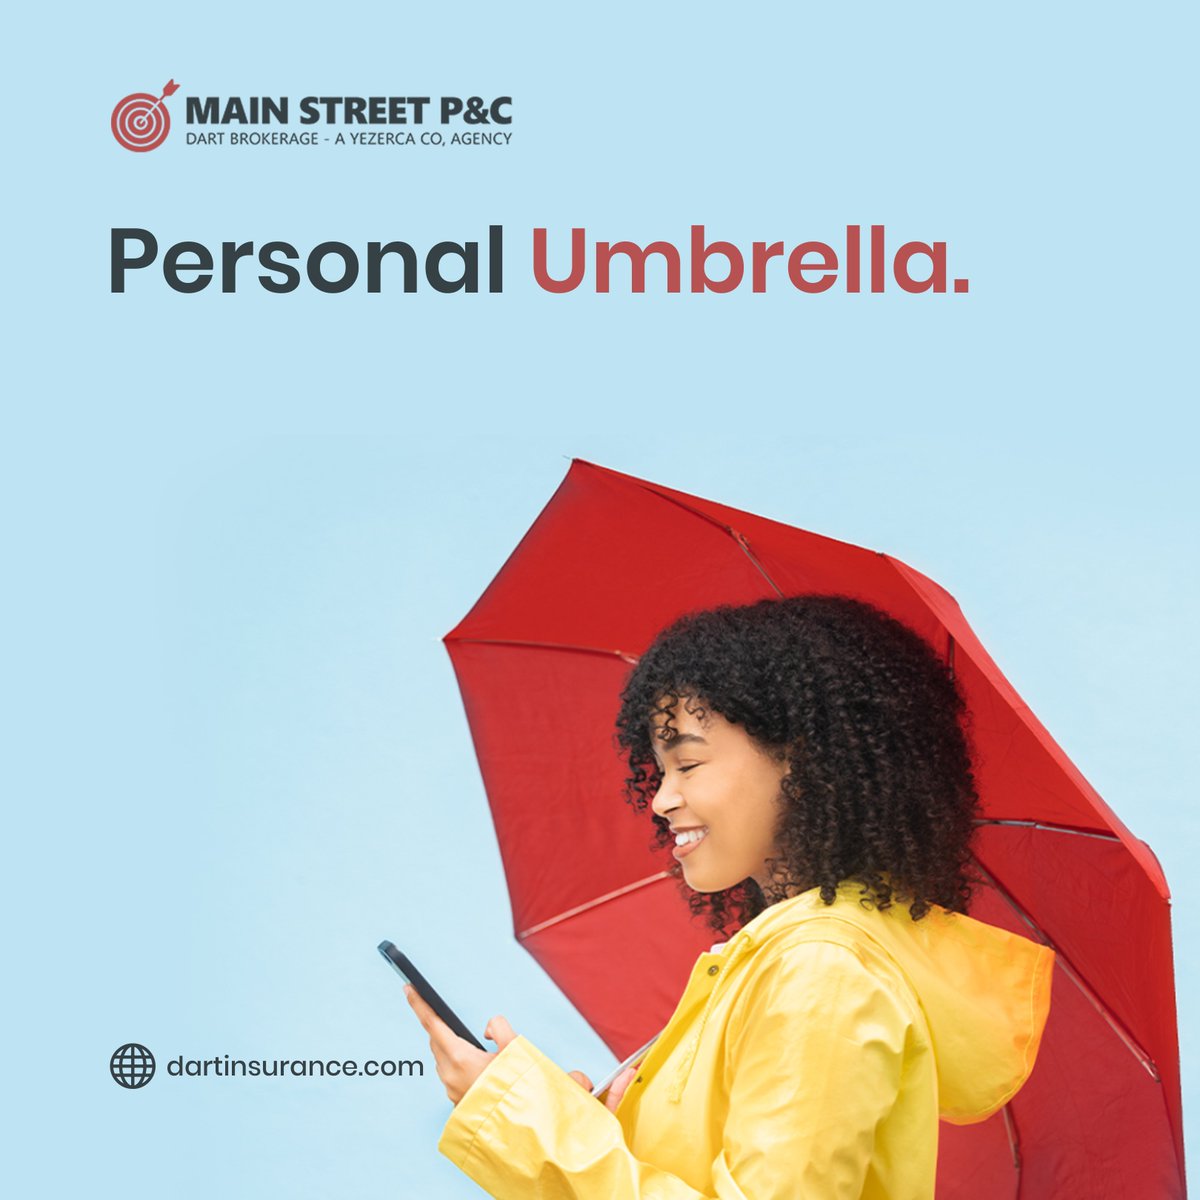 Get extra protection beyond your existing coverage. Don't let unexpected downpours leave you financially drenched. 🌦️

Expand liability coverage, enjoy peace of mind, and customize your options. Invest in a cost-effective solution today! ☂️💪

#InsuranceProtection #UmbrellaPolicy